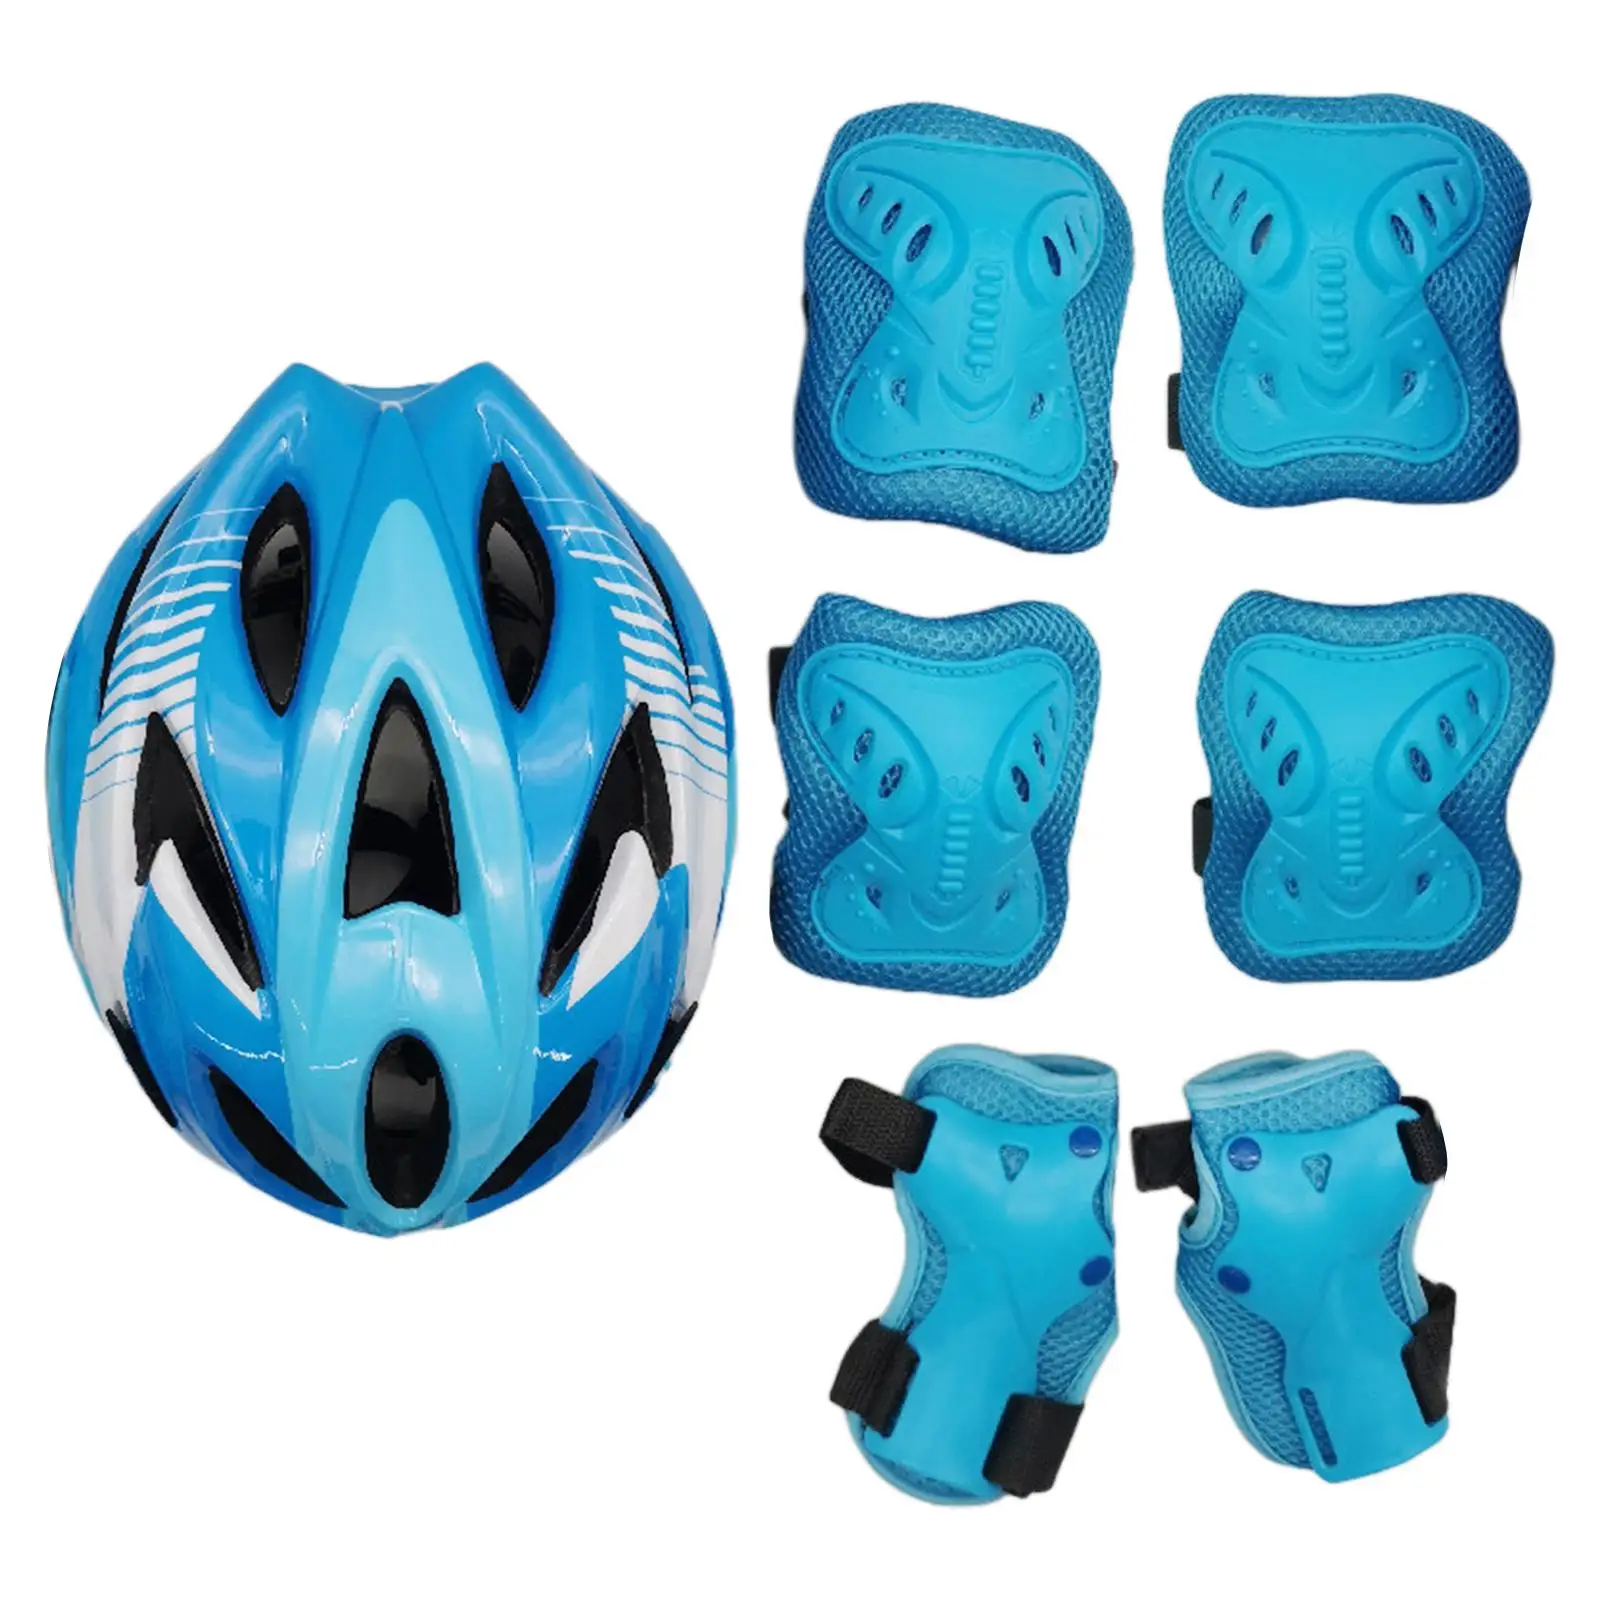 Skating Protective Gear Set Elbow Knee Pads Helmet for Kids Sports